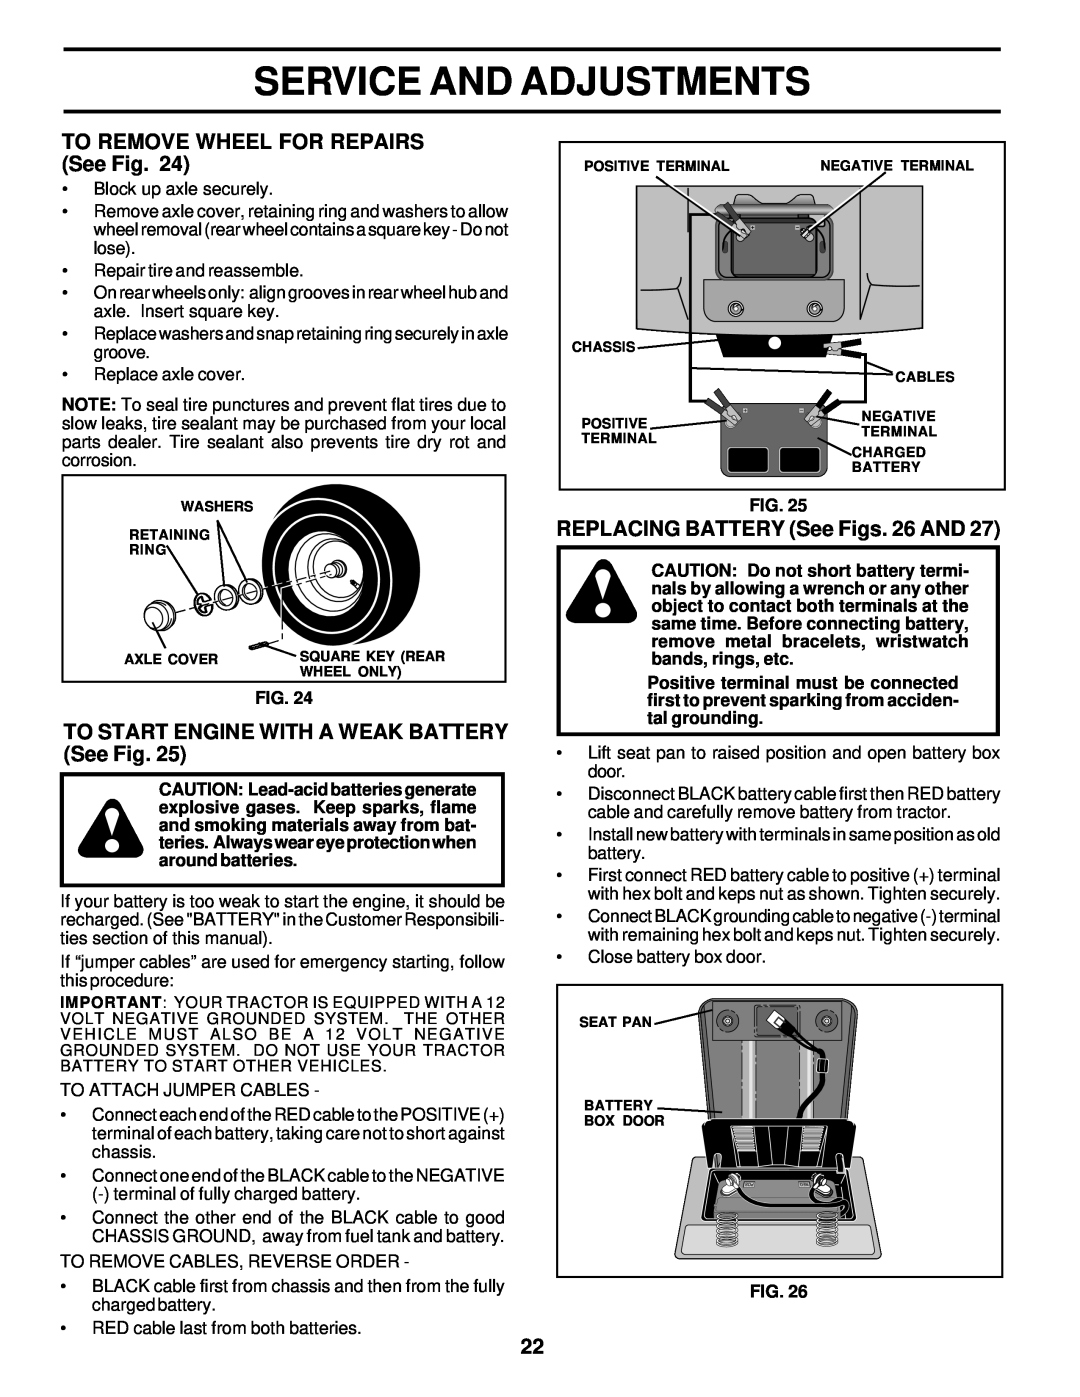 Weed Eater 177677 owner manual TO REMOVE WHEEL FOR REPAIRS See Fig, TO START ENGINE WITH A WEAK BATTERY See Fig 